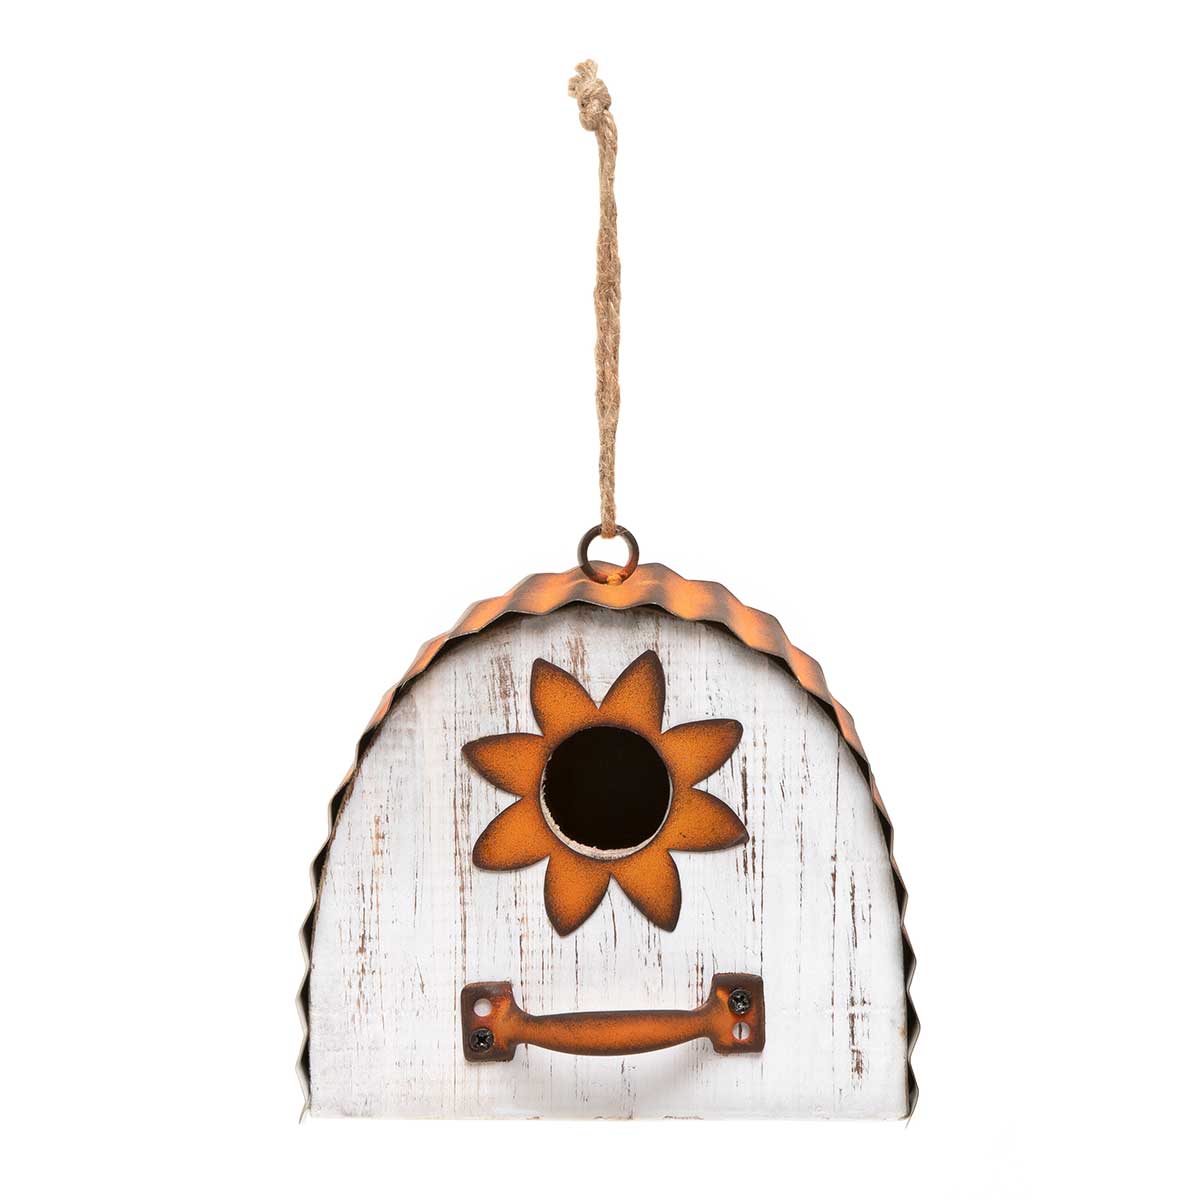 KANSAS WOOD BIRDHOUSE WHITE WITH CURVED METAL ROOF,